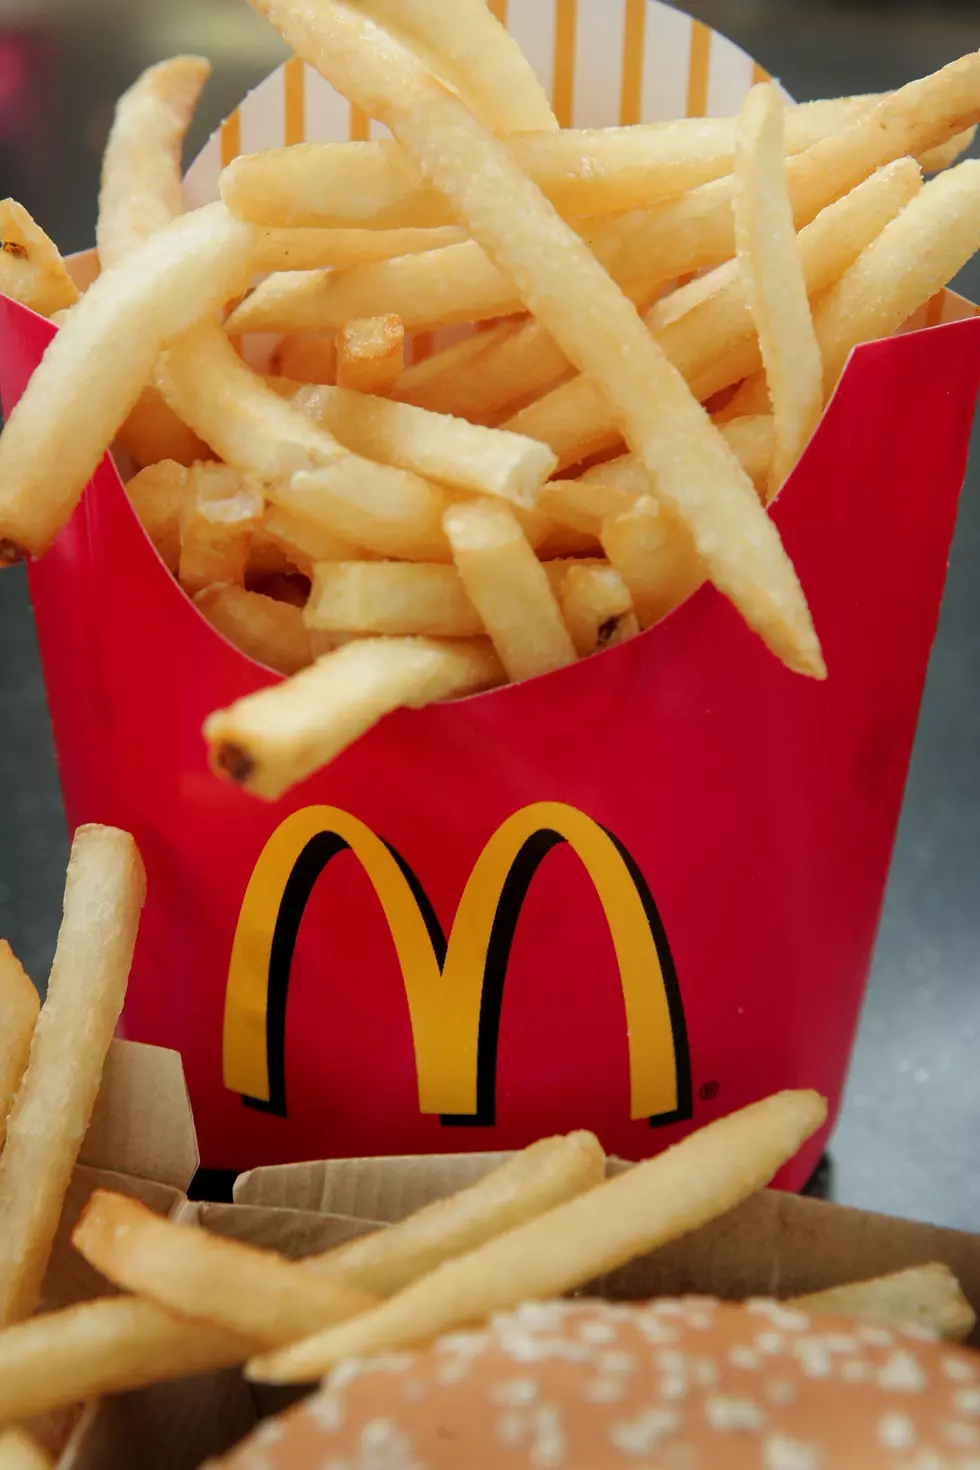 McDonald’s Testing New French Fry Option